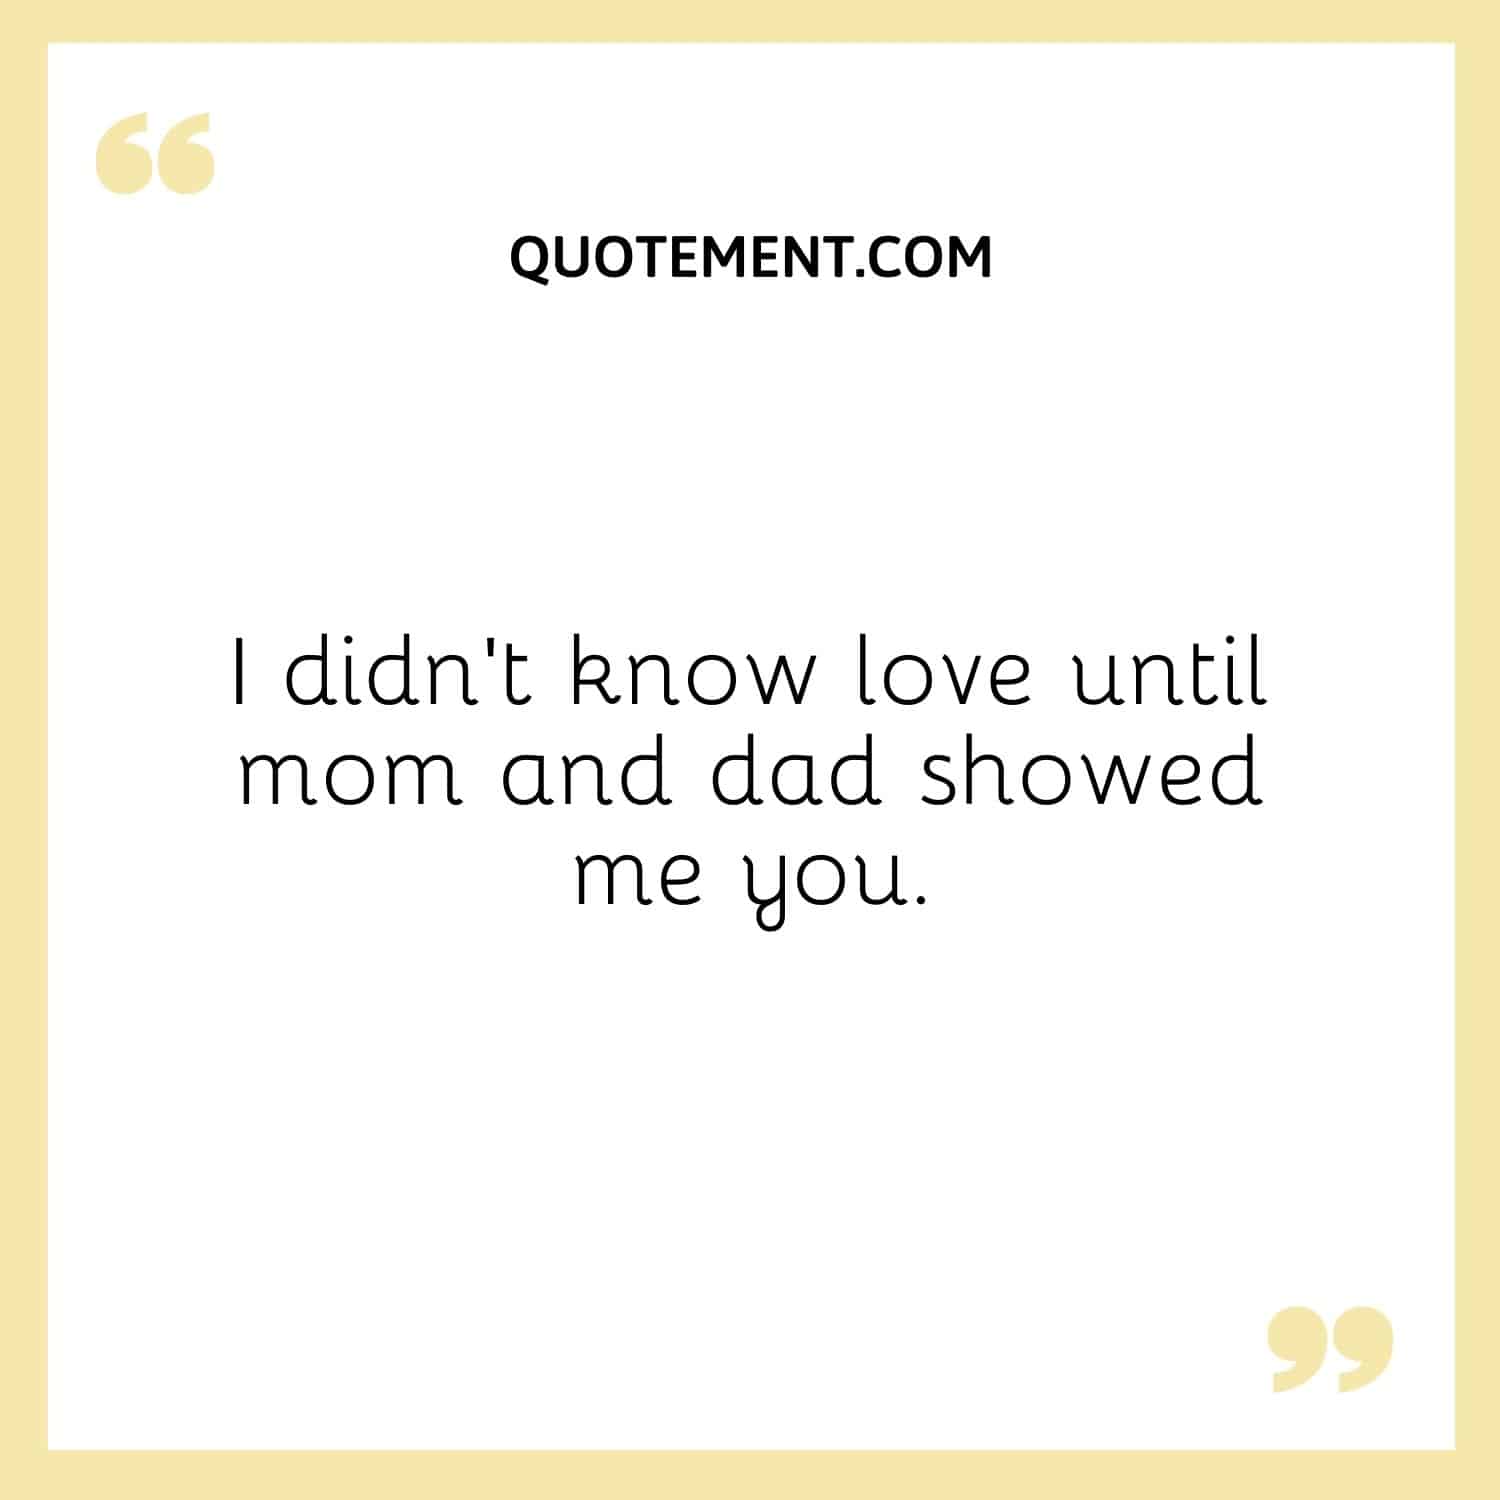 I didn't know love until mom and dad showed me you.